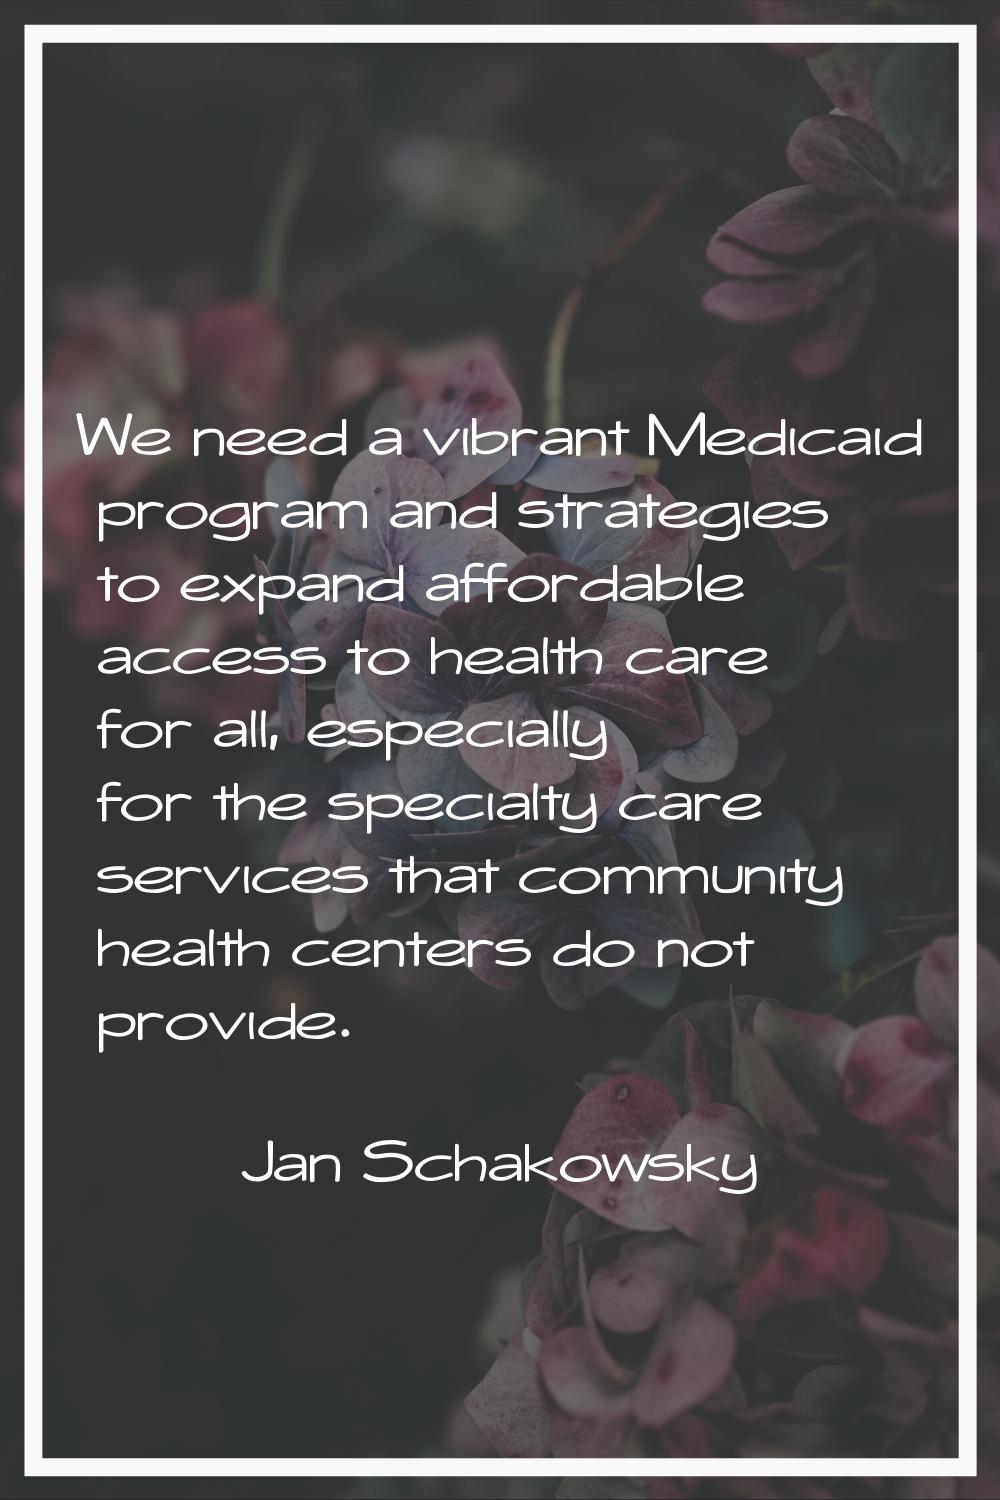 We need a vibrant Medicaid program and strategies to expand affordable access to health care for al